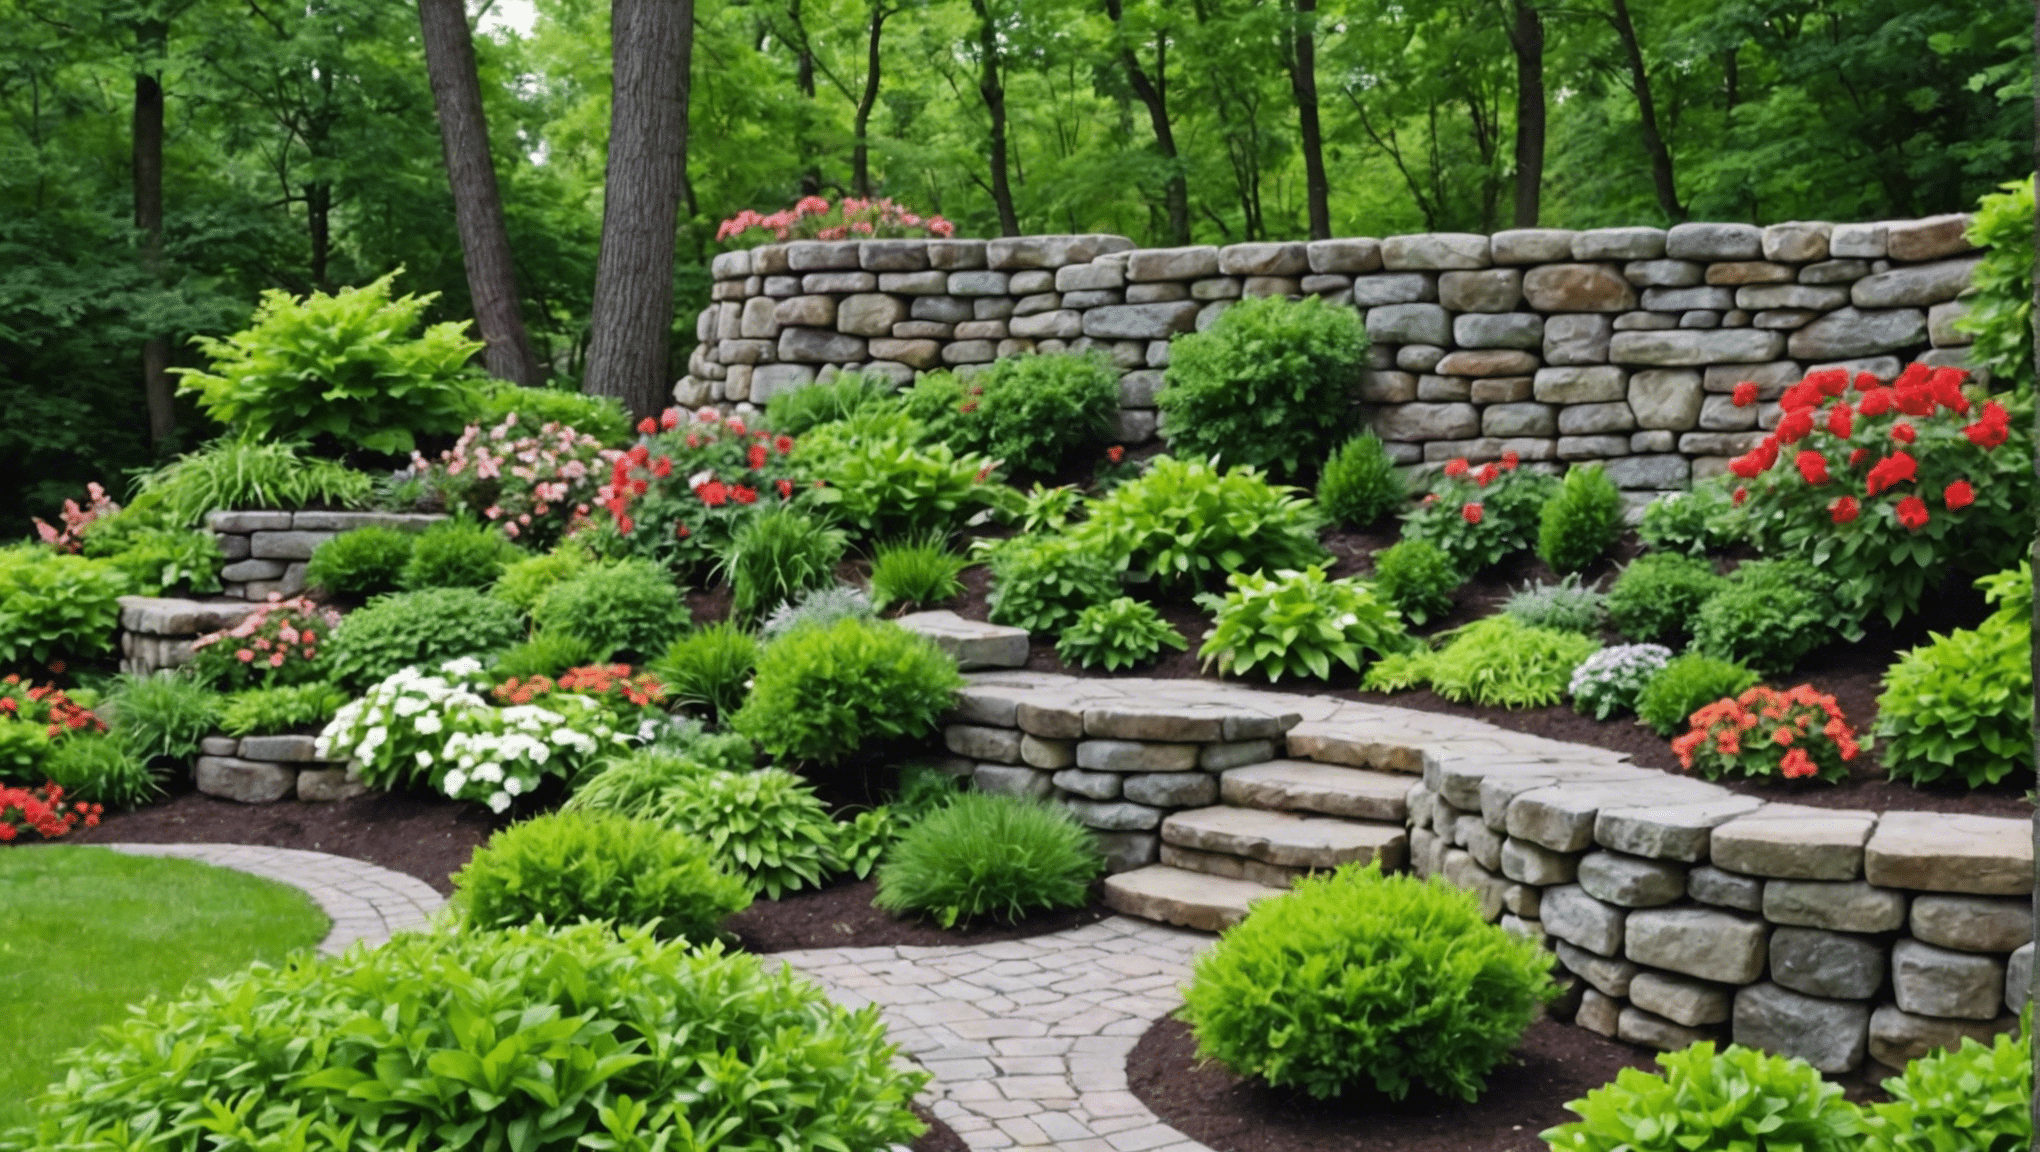 discover unique and imaginative rock wall gardening concepts that inspire creativity and innovation for your outdoor space.